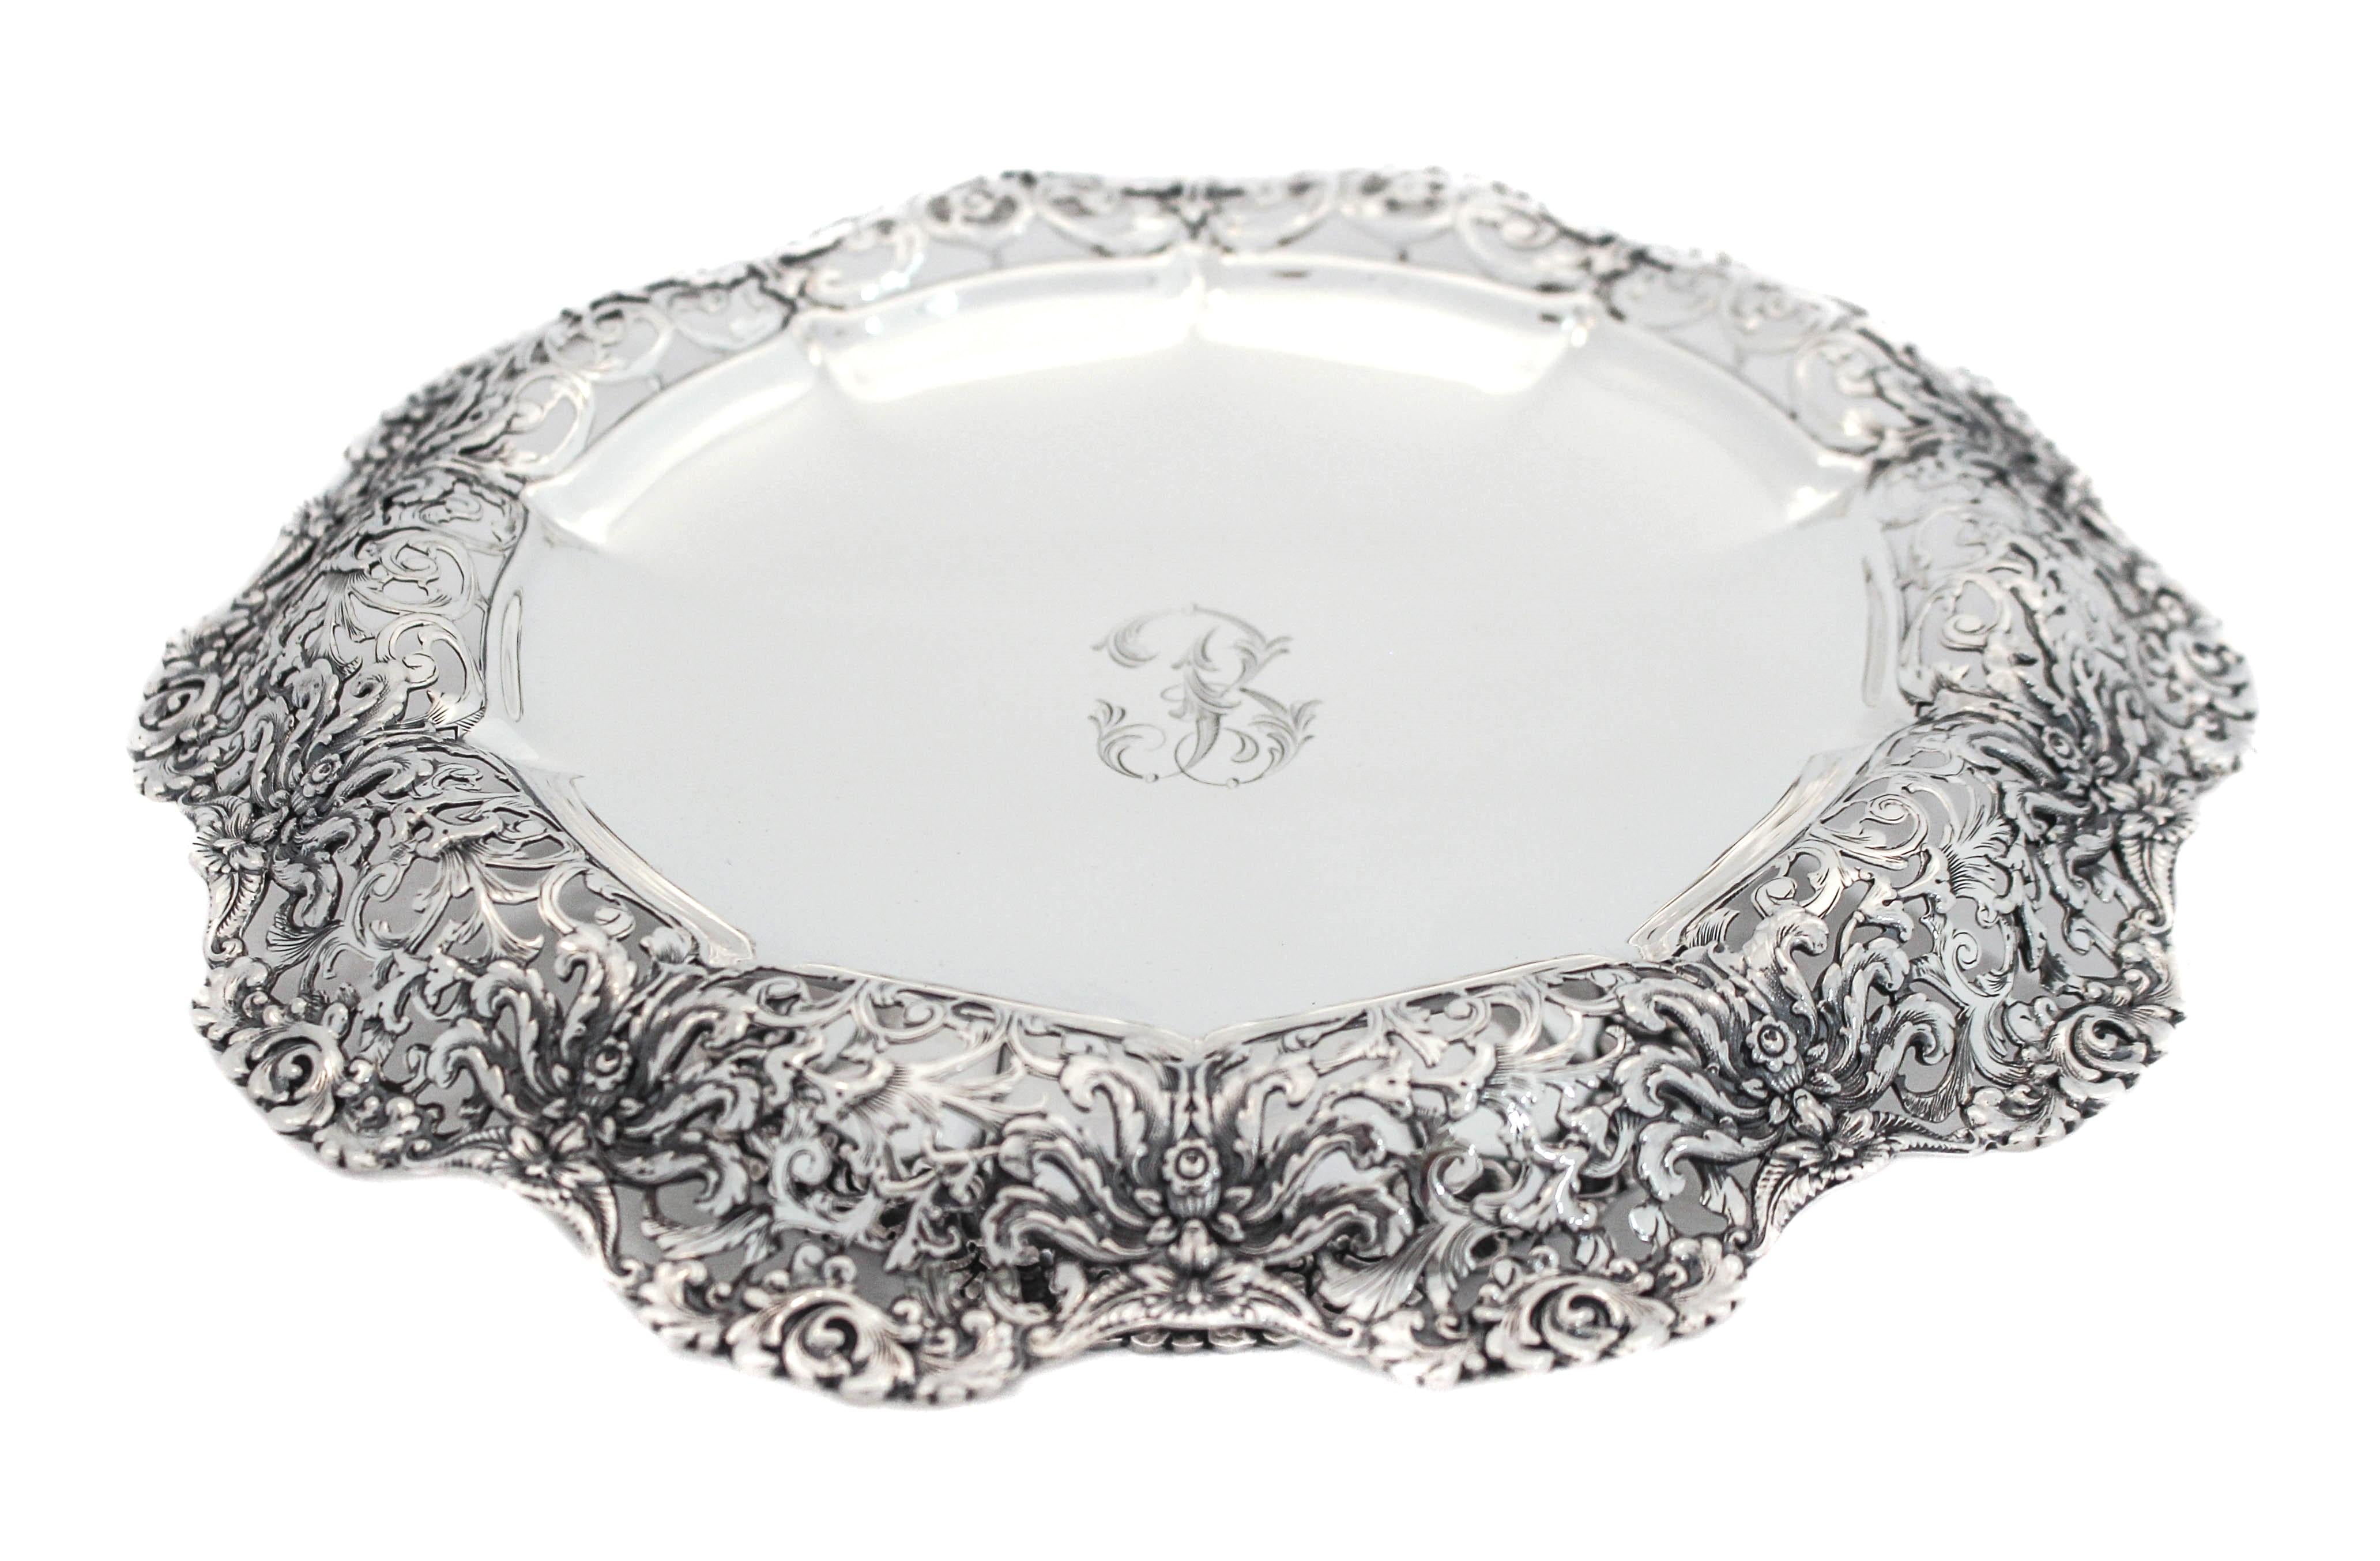 If antique sterling silver Tiffany & Co. pieces peak your interest, read on. This sterling tazza has detailed reticulated lattice work around the scalloped border. The base has similar work and is not weighted. The center is flat so it’s no problem